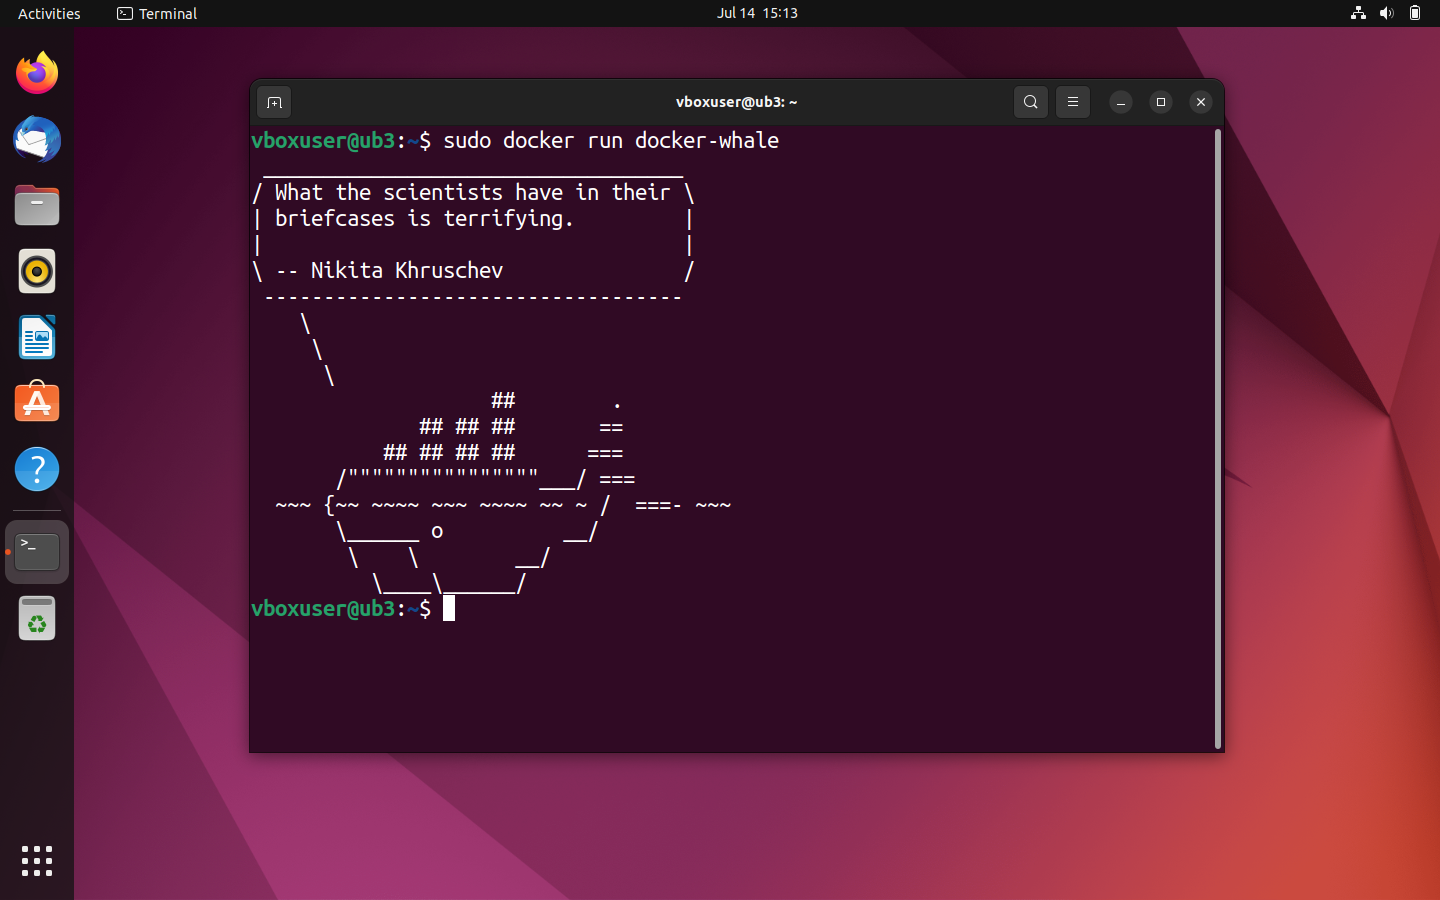 Container based on docker-whale: Text output in the terminal